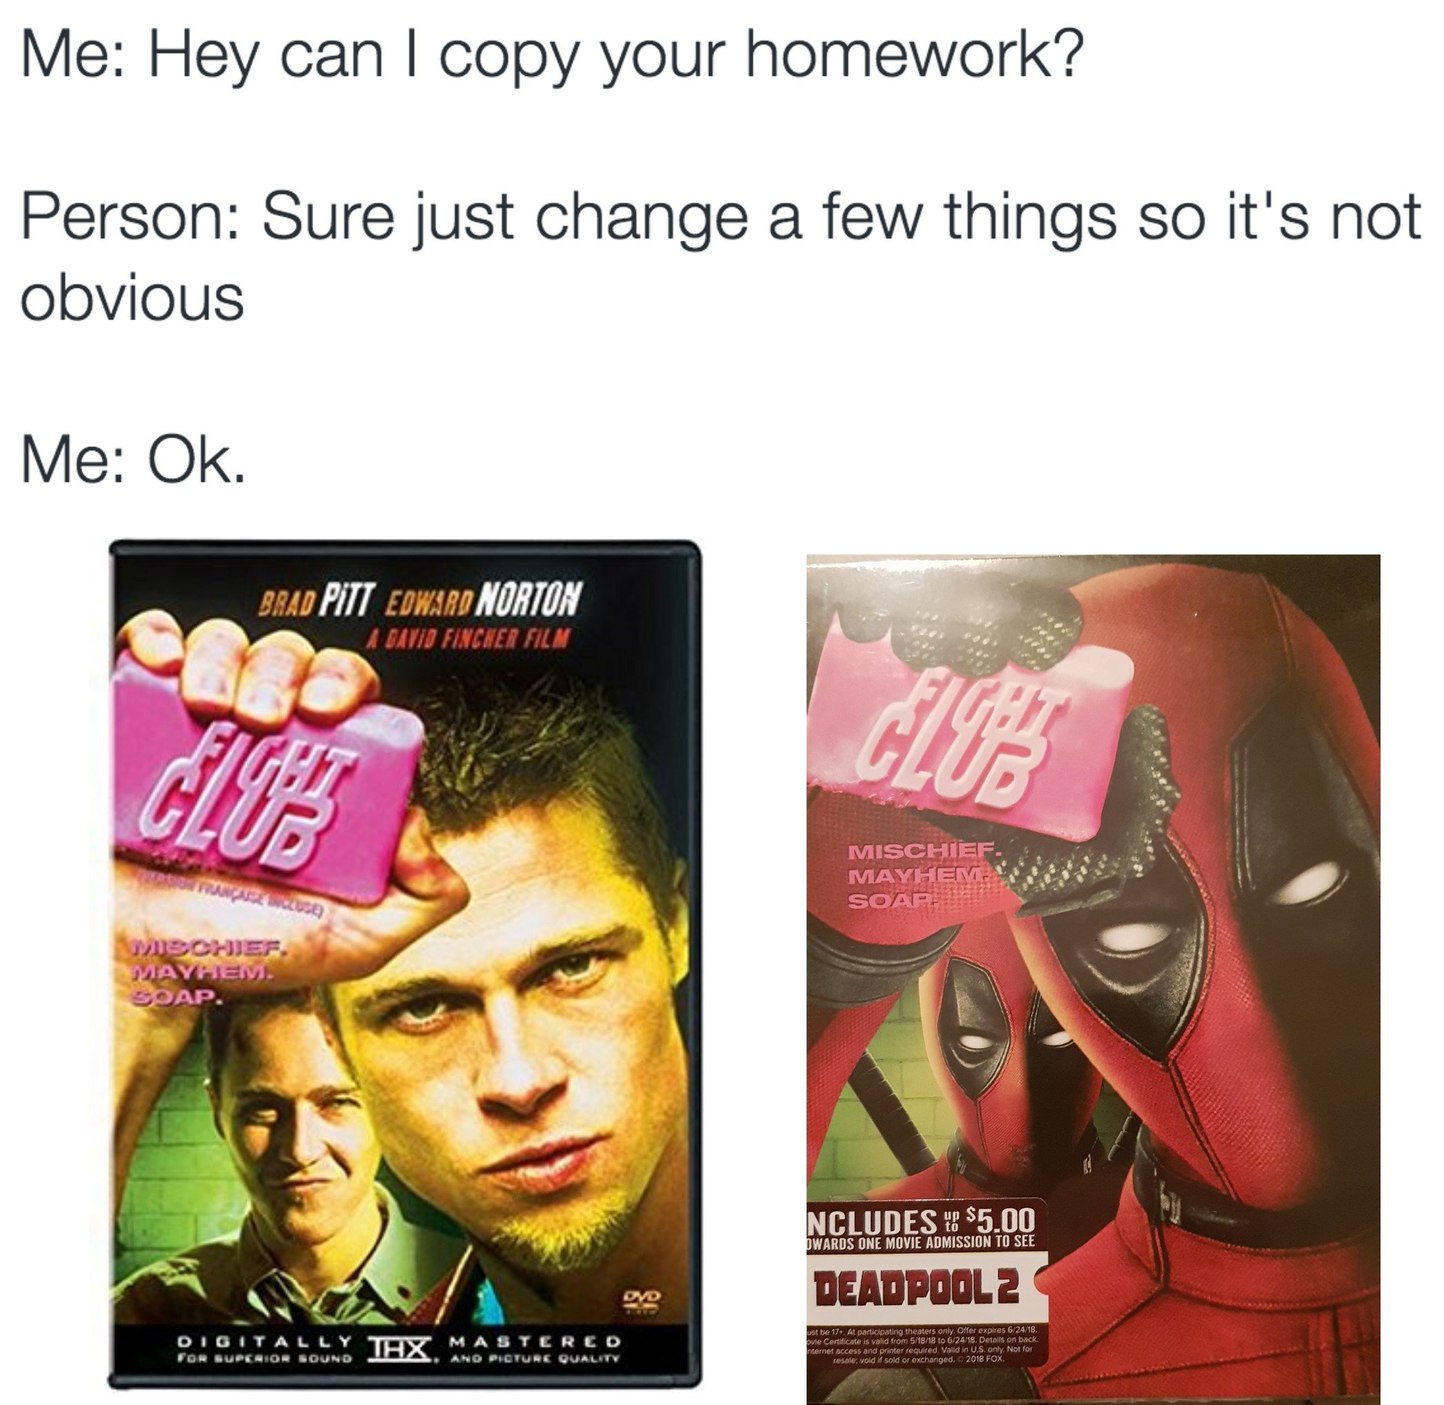 Walmart has exclusive "photo bombed" movie covers for deadpool 2 - meme